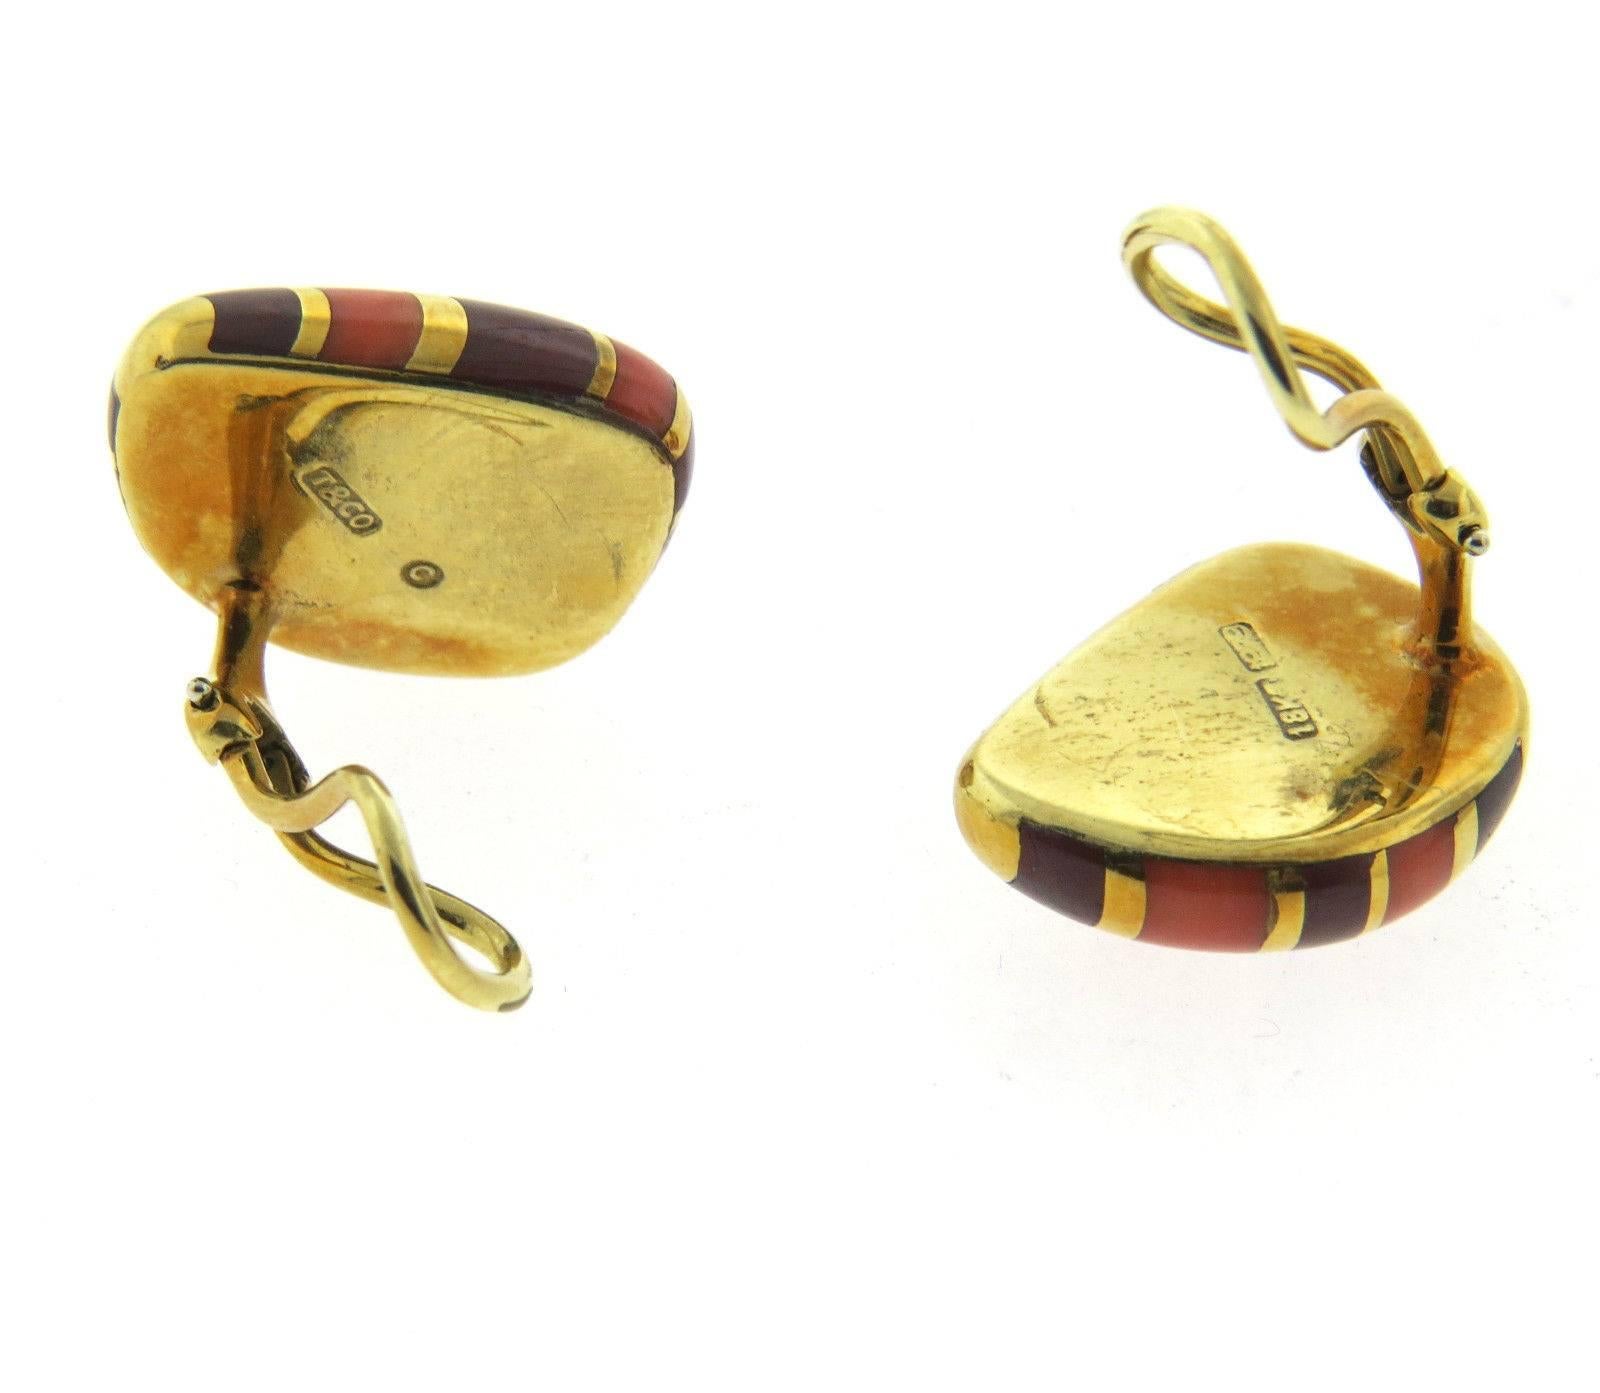 A pair of 18k yellow gold with a jasper and coral inlay.  Crafted by Tiffany & Co, the earrings measure 21mm x 17mm.  Marked: T & Co, 1979 18k.  The weight of the earrings is 18 grams.